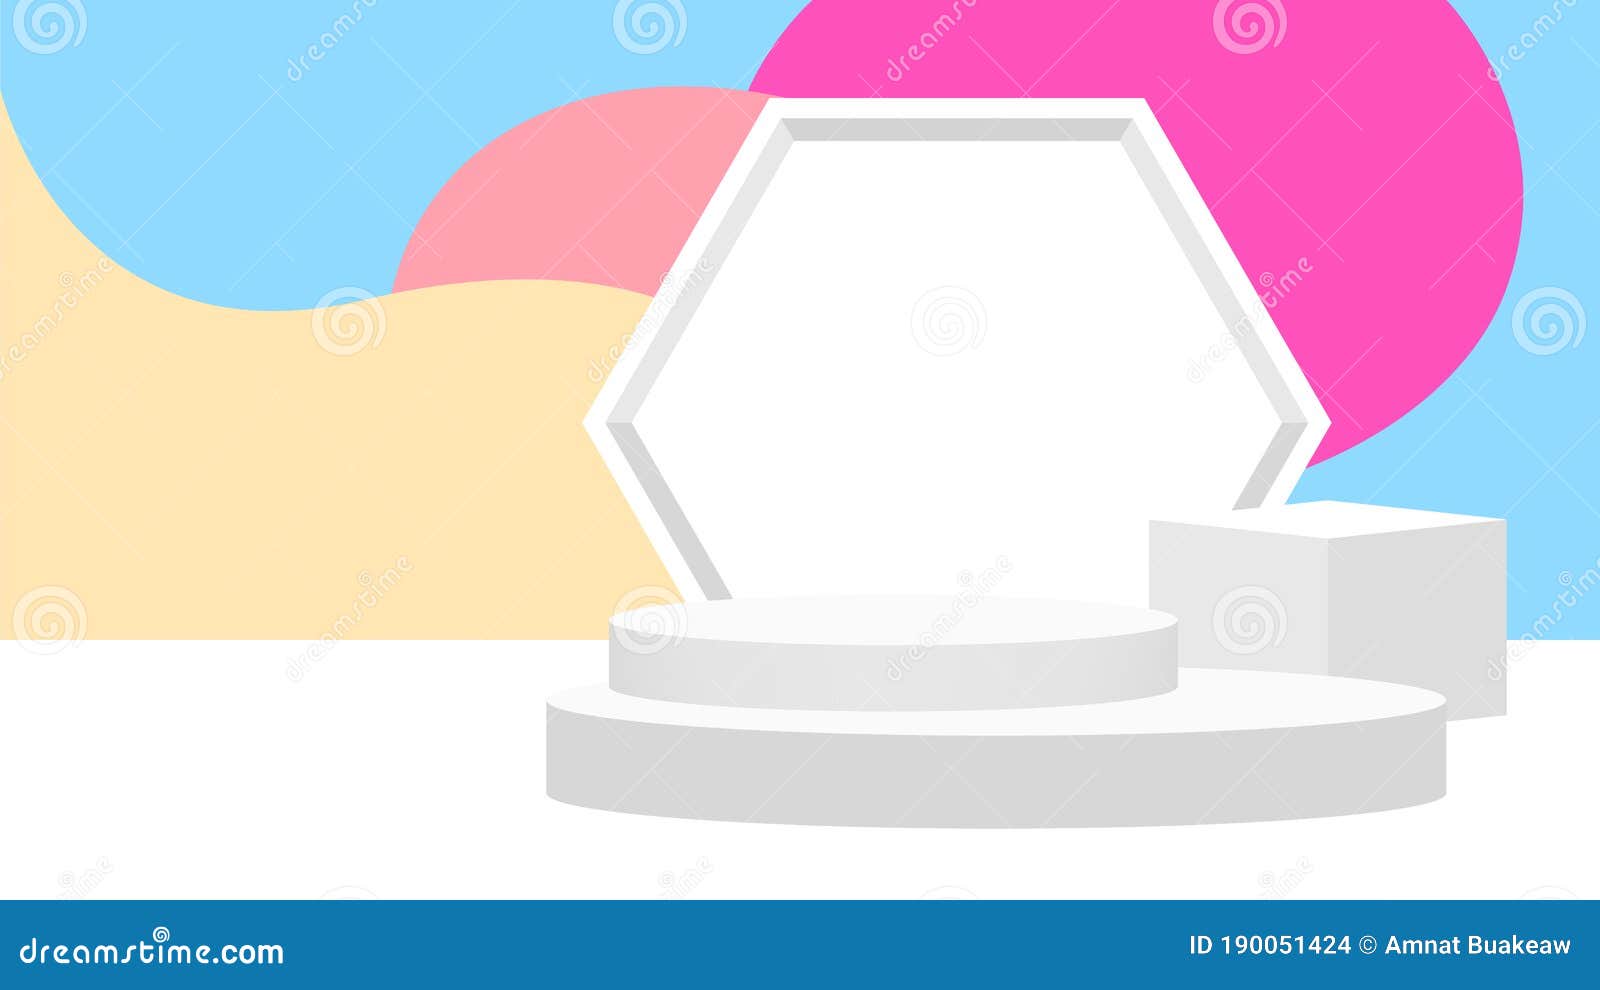 Pedestal 3d White Grey on Pastel Background, Podium Stage for Victory Champion Position, Pedestal Ellipse Box for Cosmetics Stock Vector - Illustration of luminous, light: 190051424